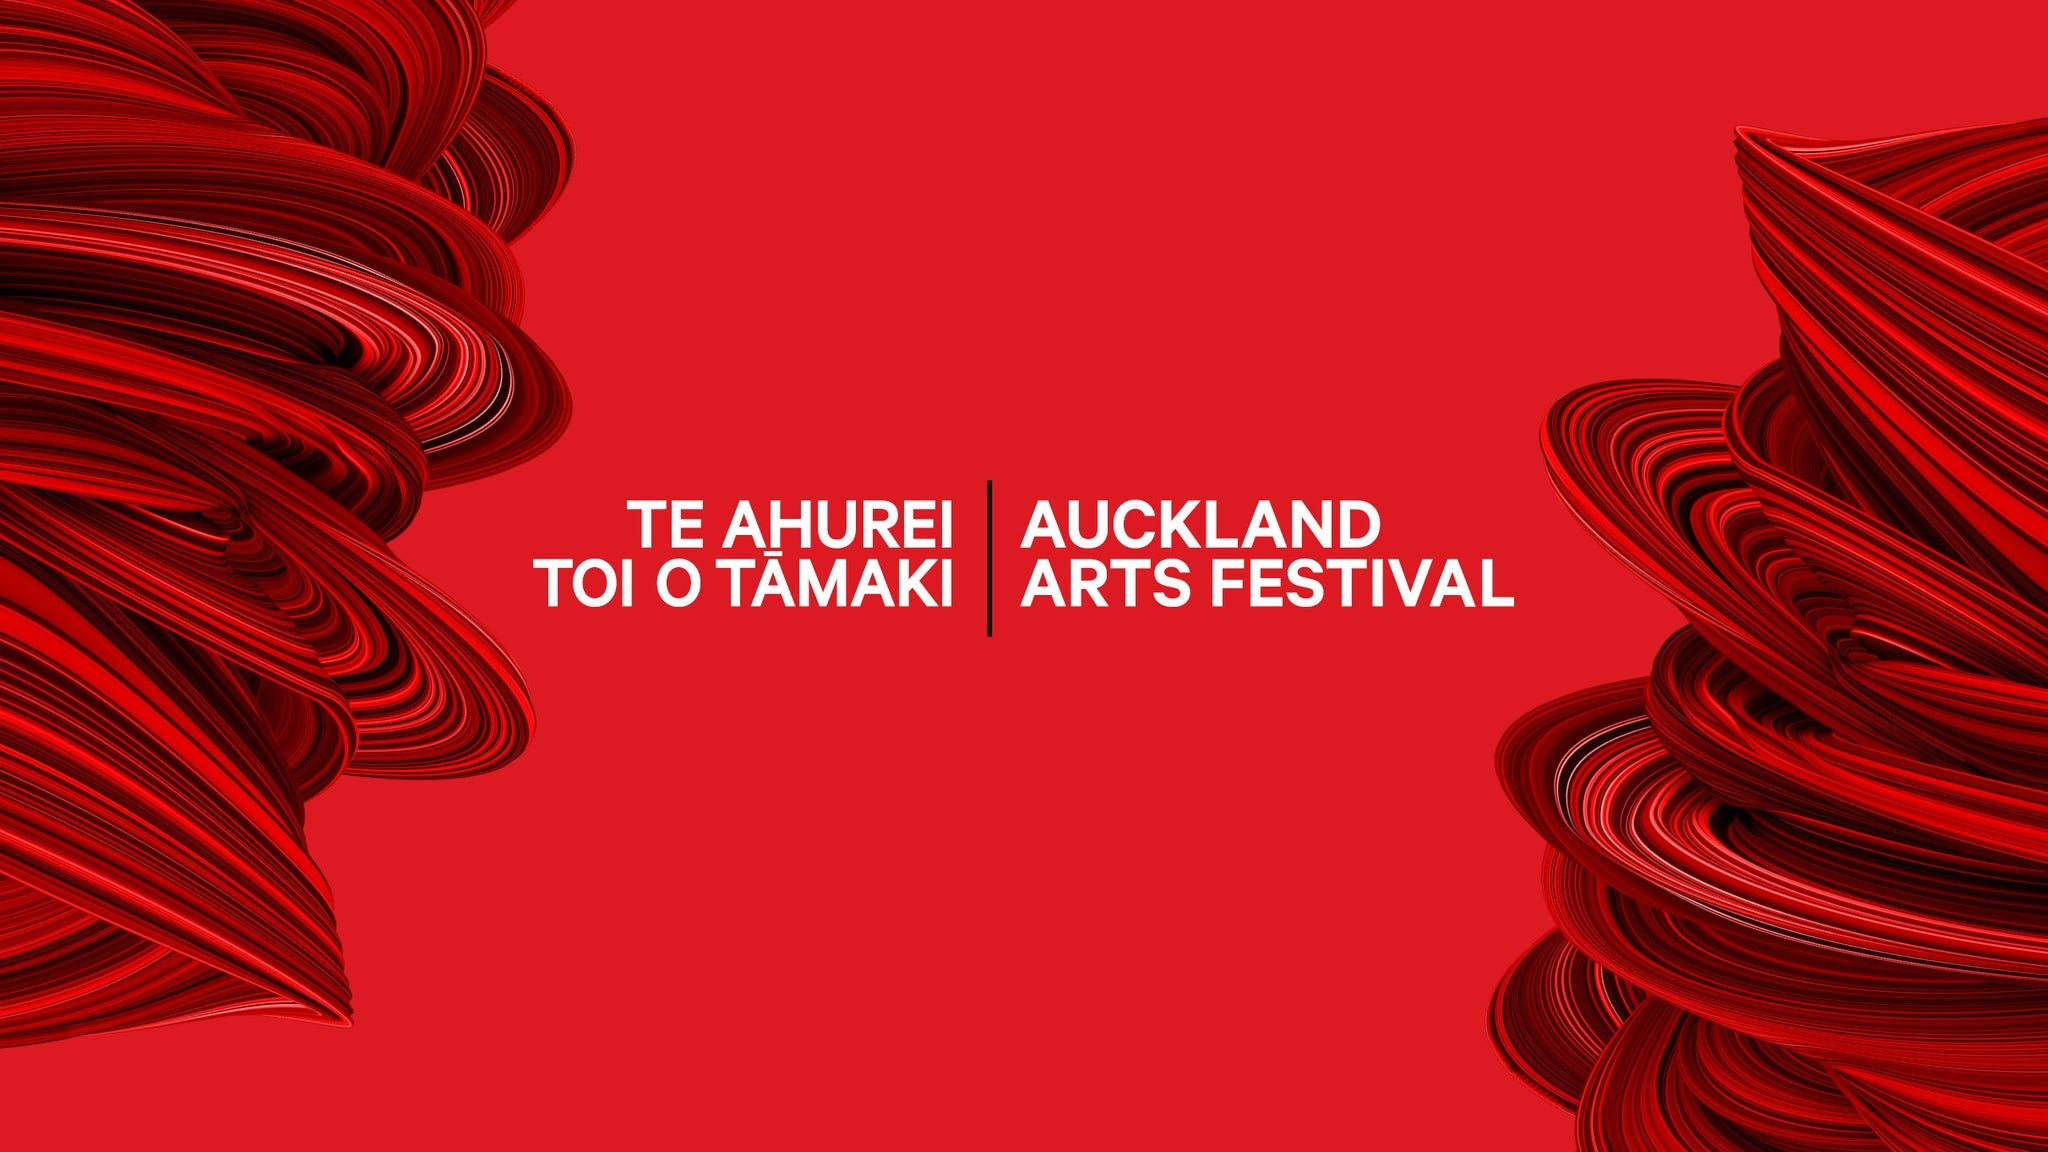 Image used with permission from Ticketmaster | AKLFEST: Dragons tickets